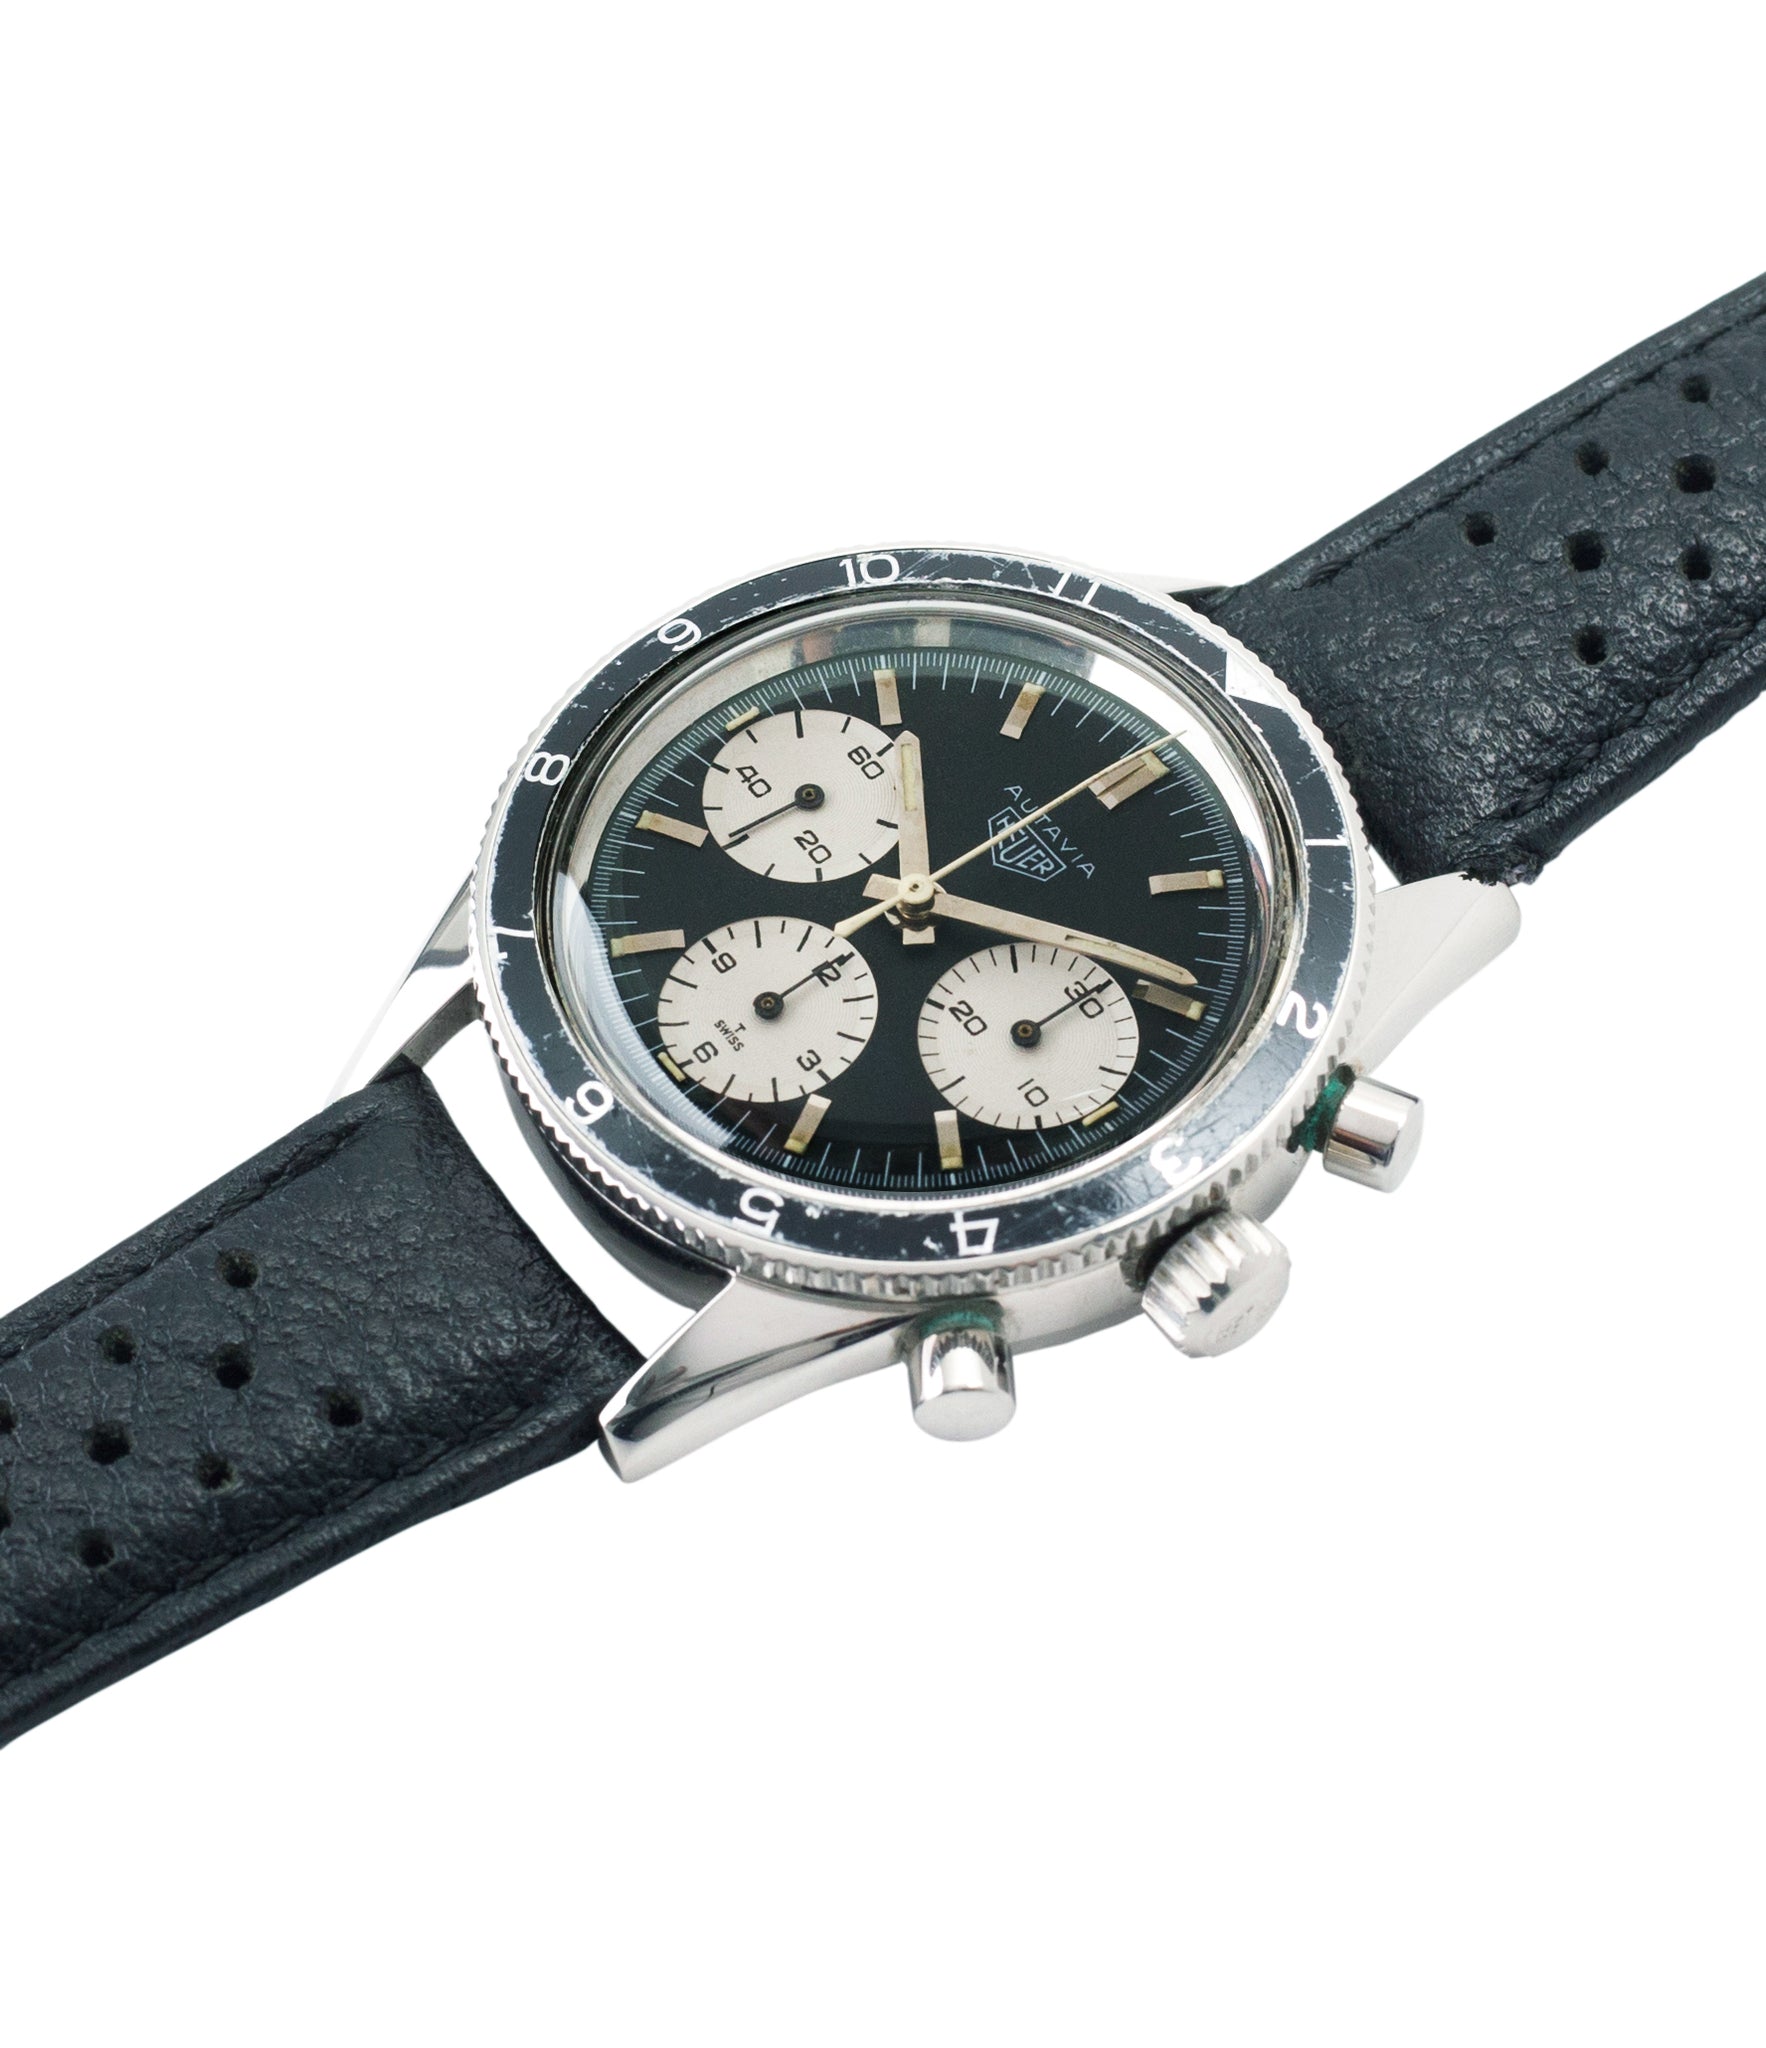 selling vintage Heuer Autavia Rindt 2446 Valjoux 72 manual-winding steel sport chronograph watch for sale online at A Collected Man London UK vintage rare watch specialist